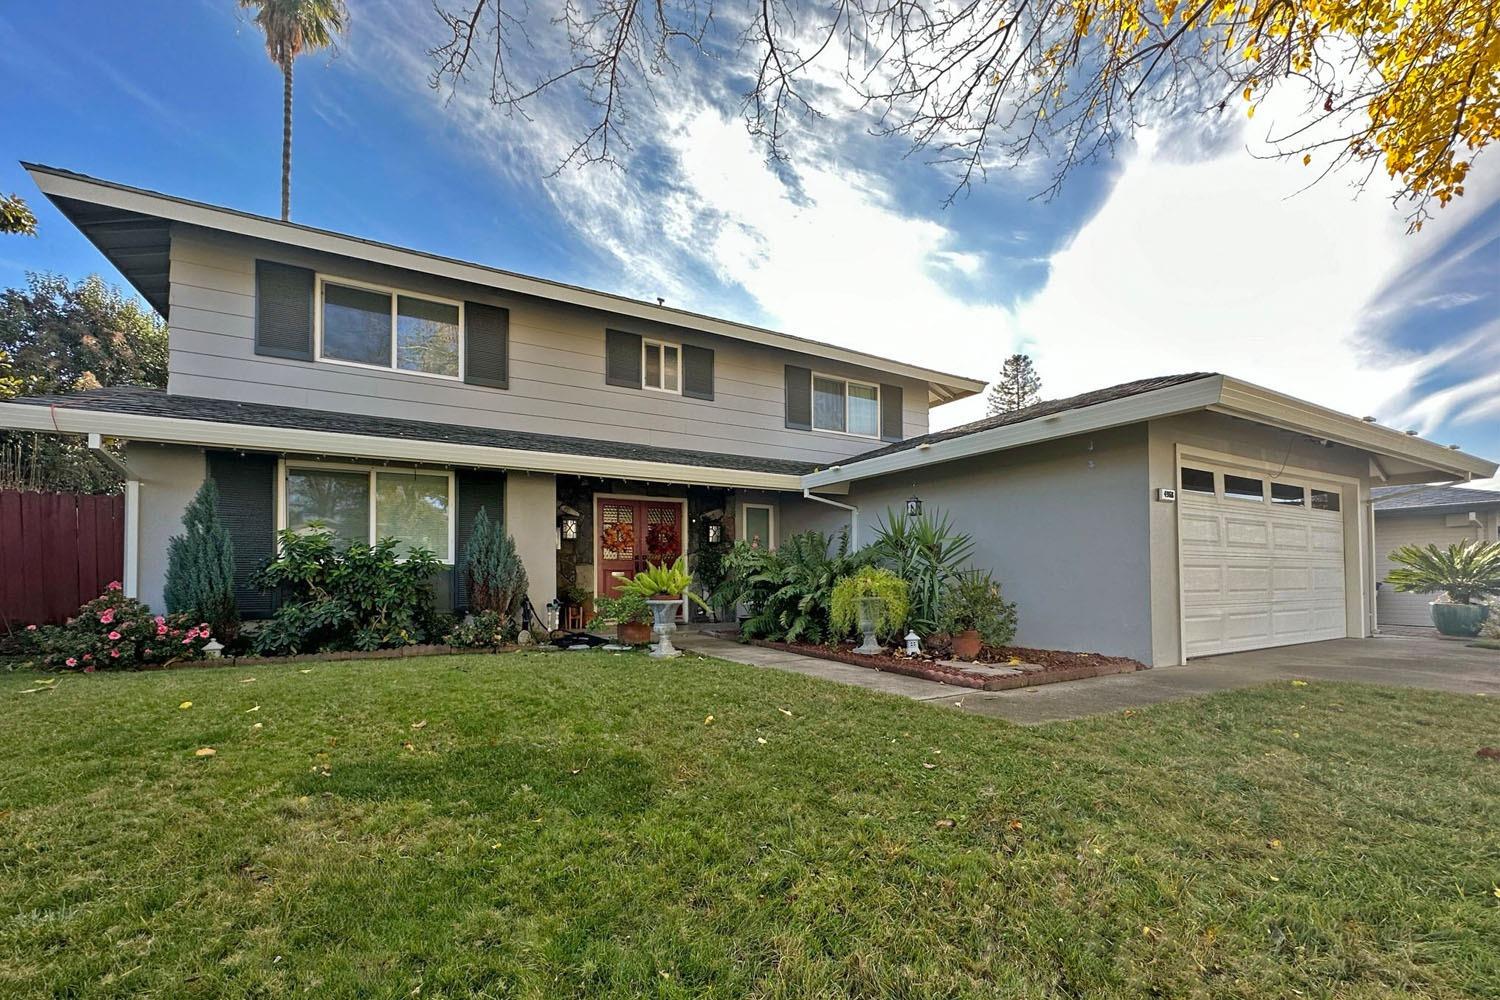 RARE AT THIS PRICE! Tucked away in the sought after Larchmont Hills neighborhood of Fair Oaks, you'l